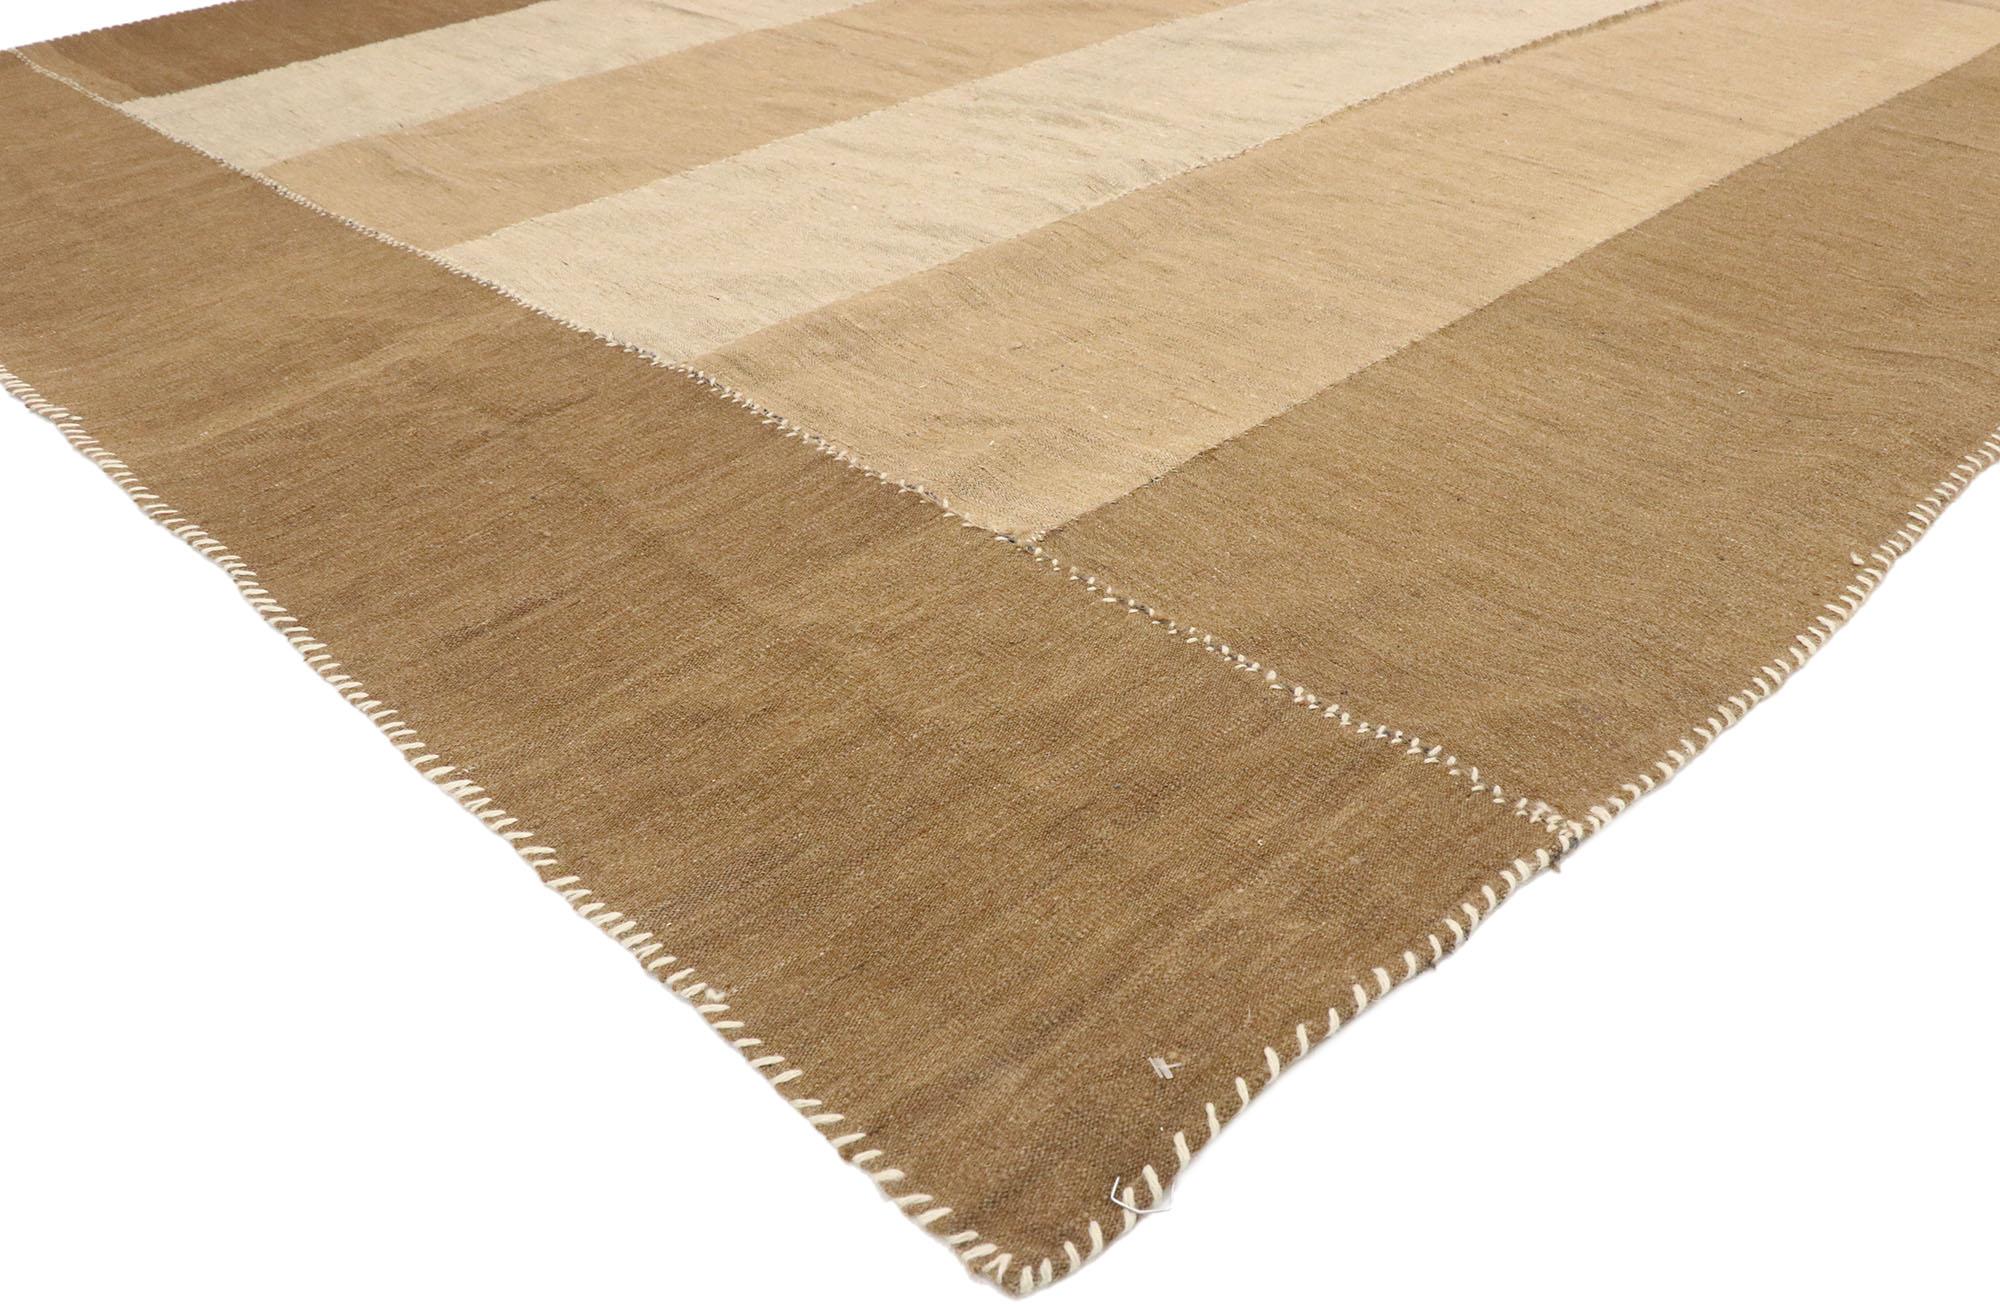 76387 vintage Persian Kilim Area rug with midcentury Organic Modern style. Balancing a classic stripe design with earth-tone colors and midcentury Organic Modern style, this handwoven wool vintage Persian Kilim area rug is a captivating vision of